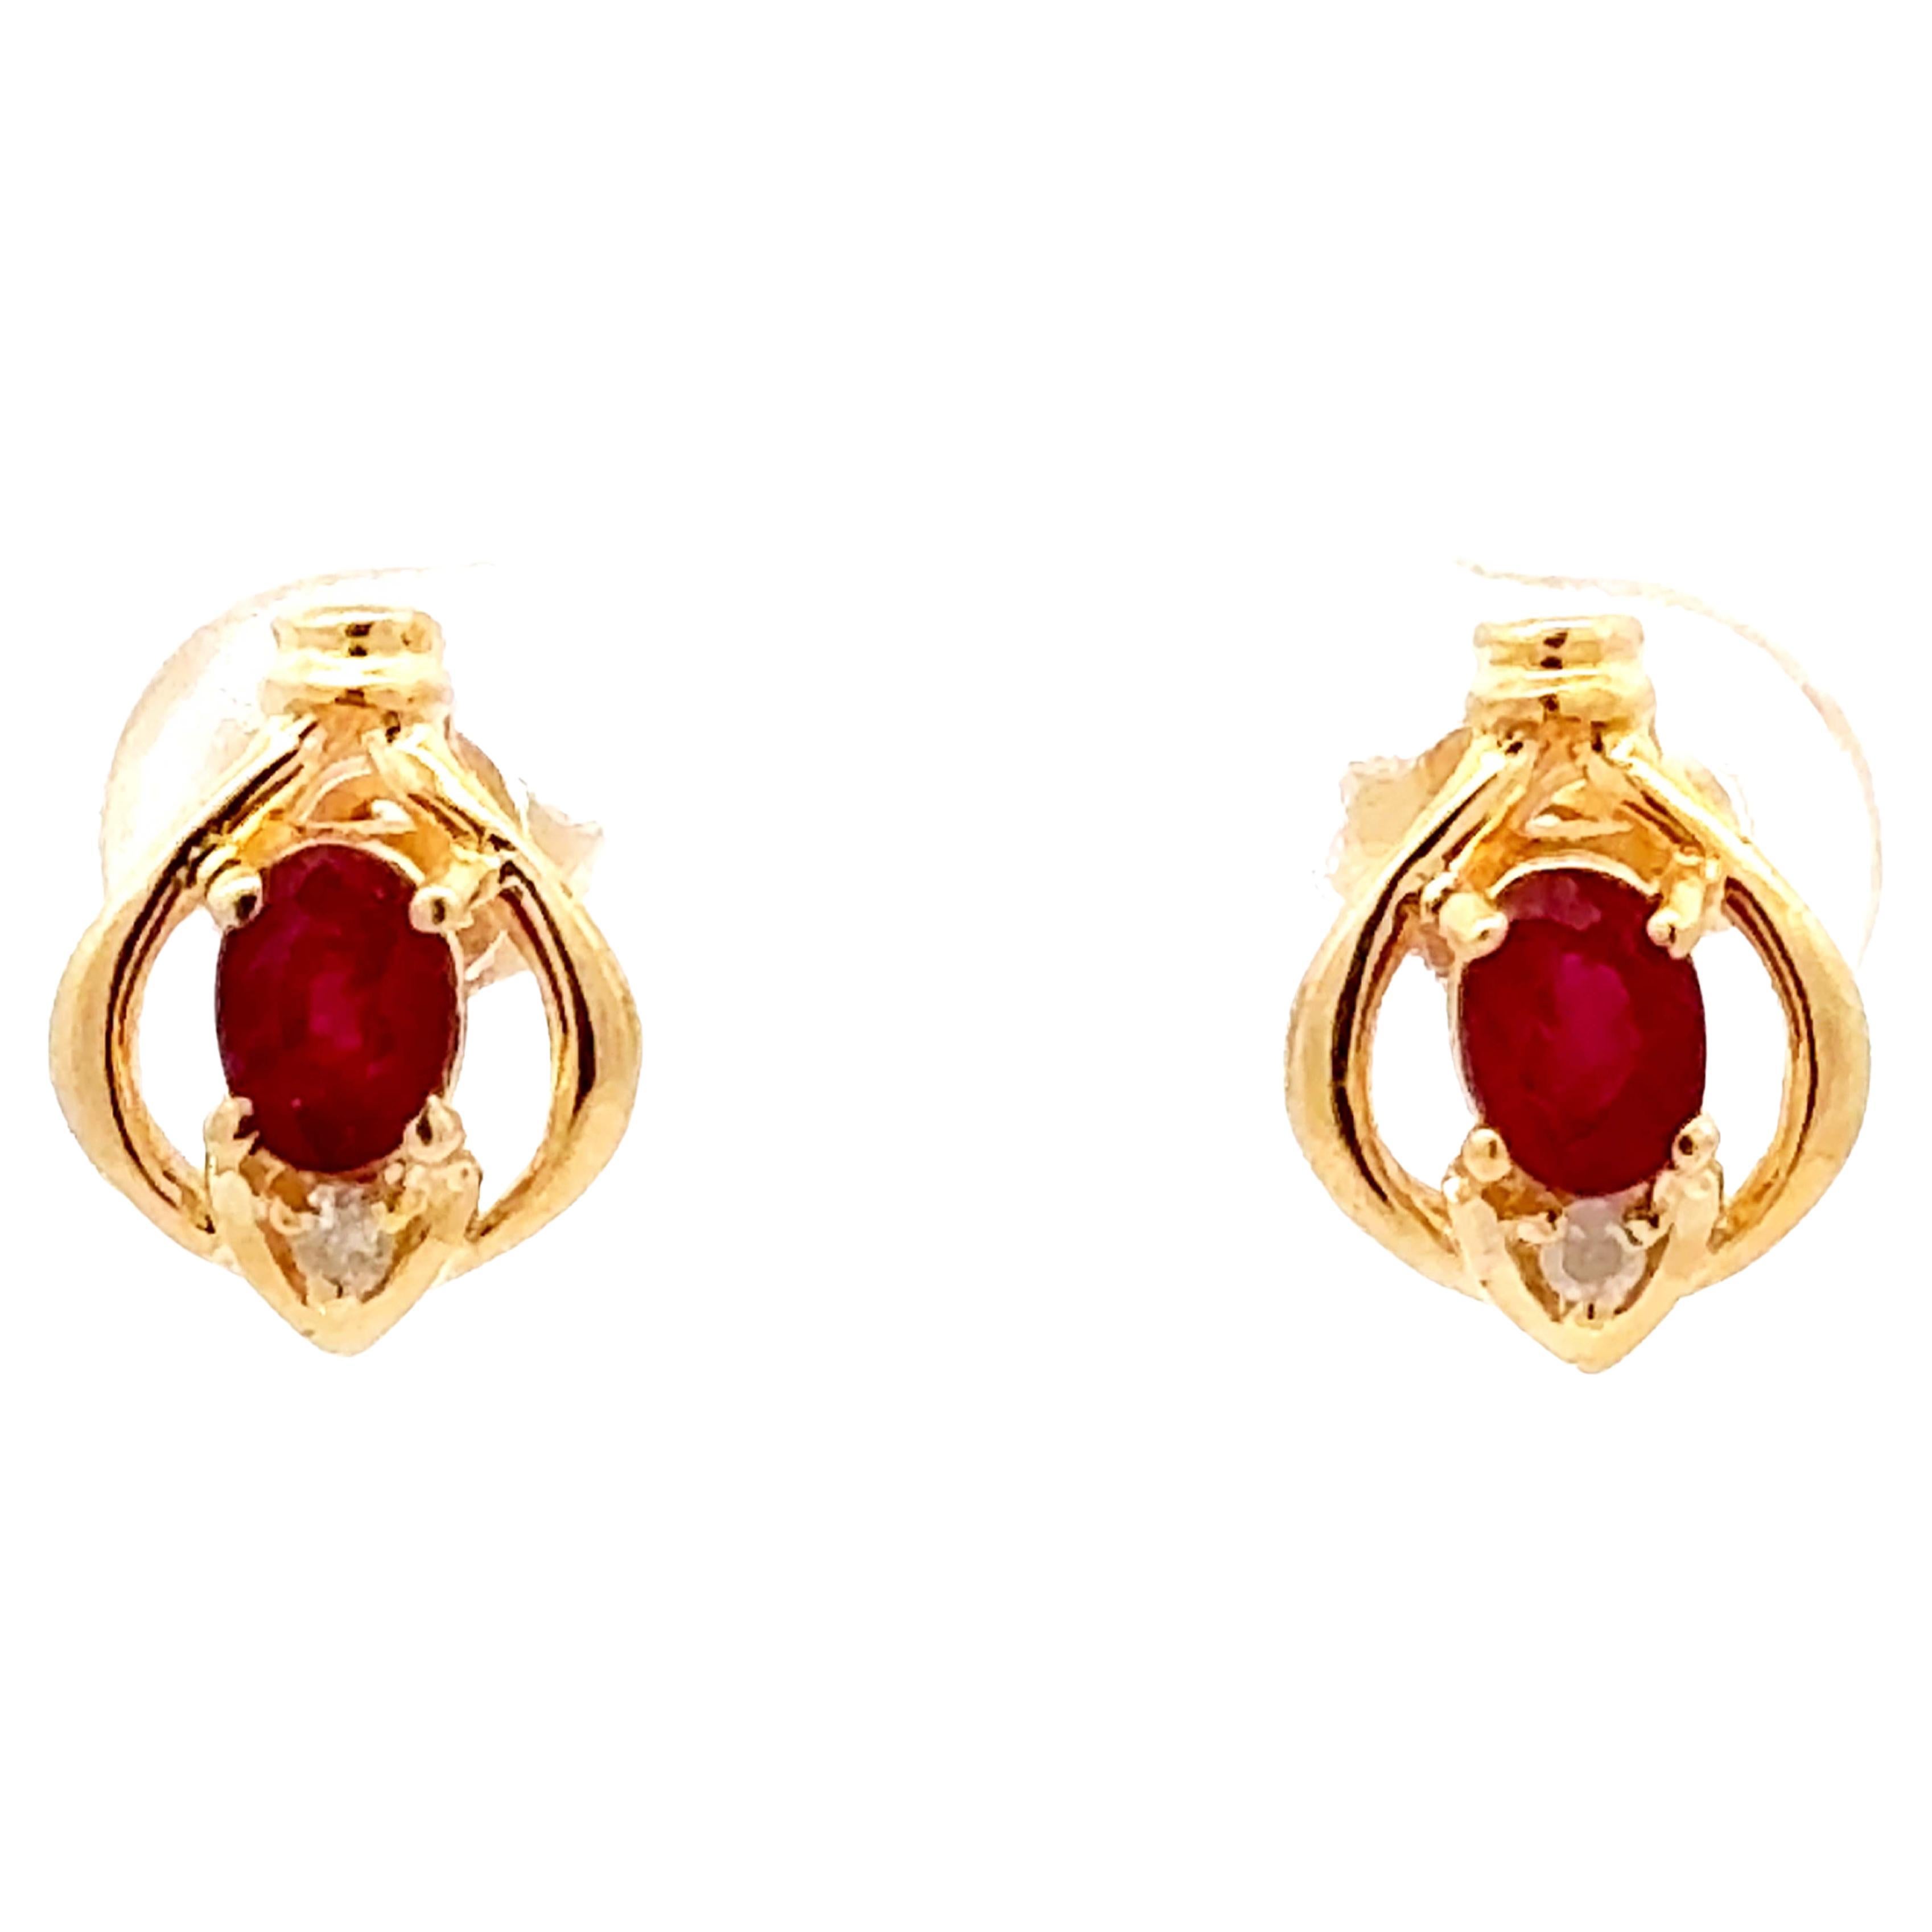 Oval Red Ruby and Diamond Stud Earrings 14k Yellow Gold